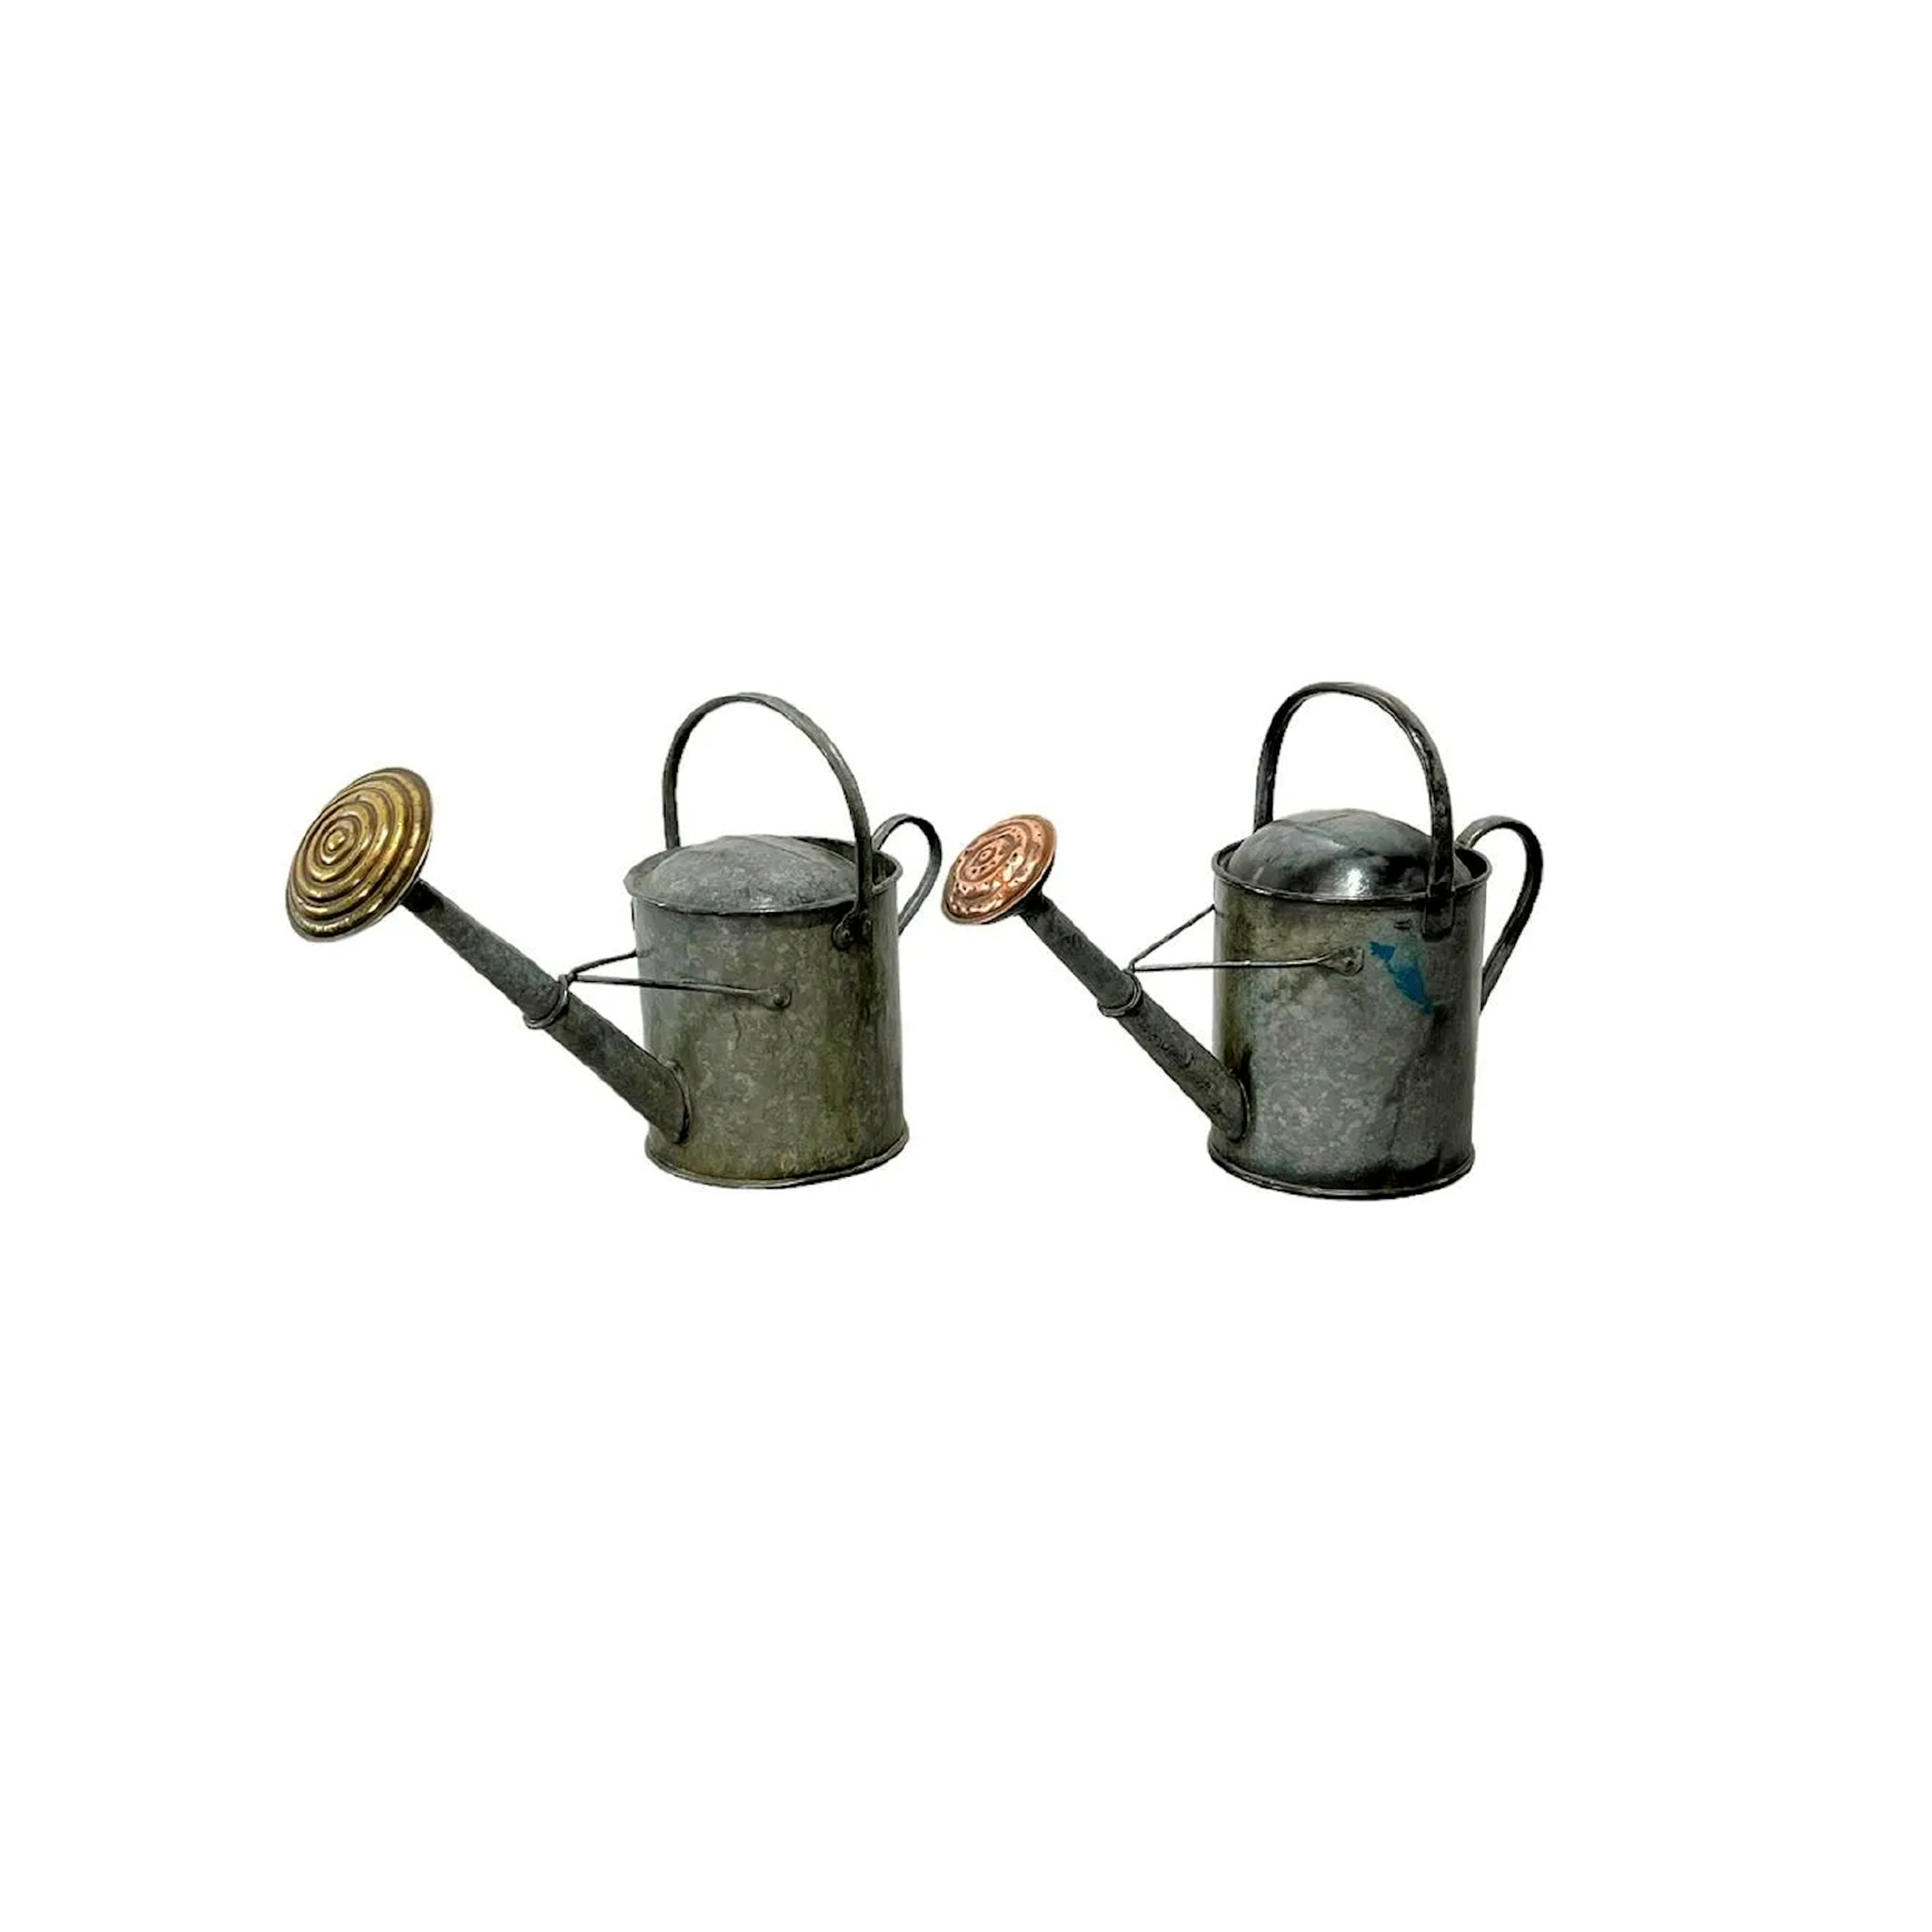 English Watering Cans - Pair